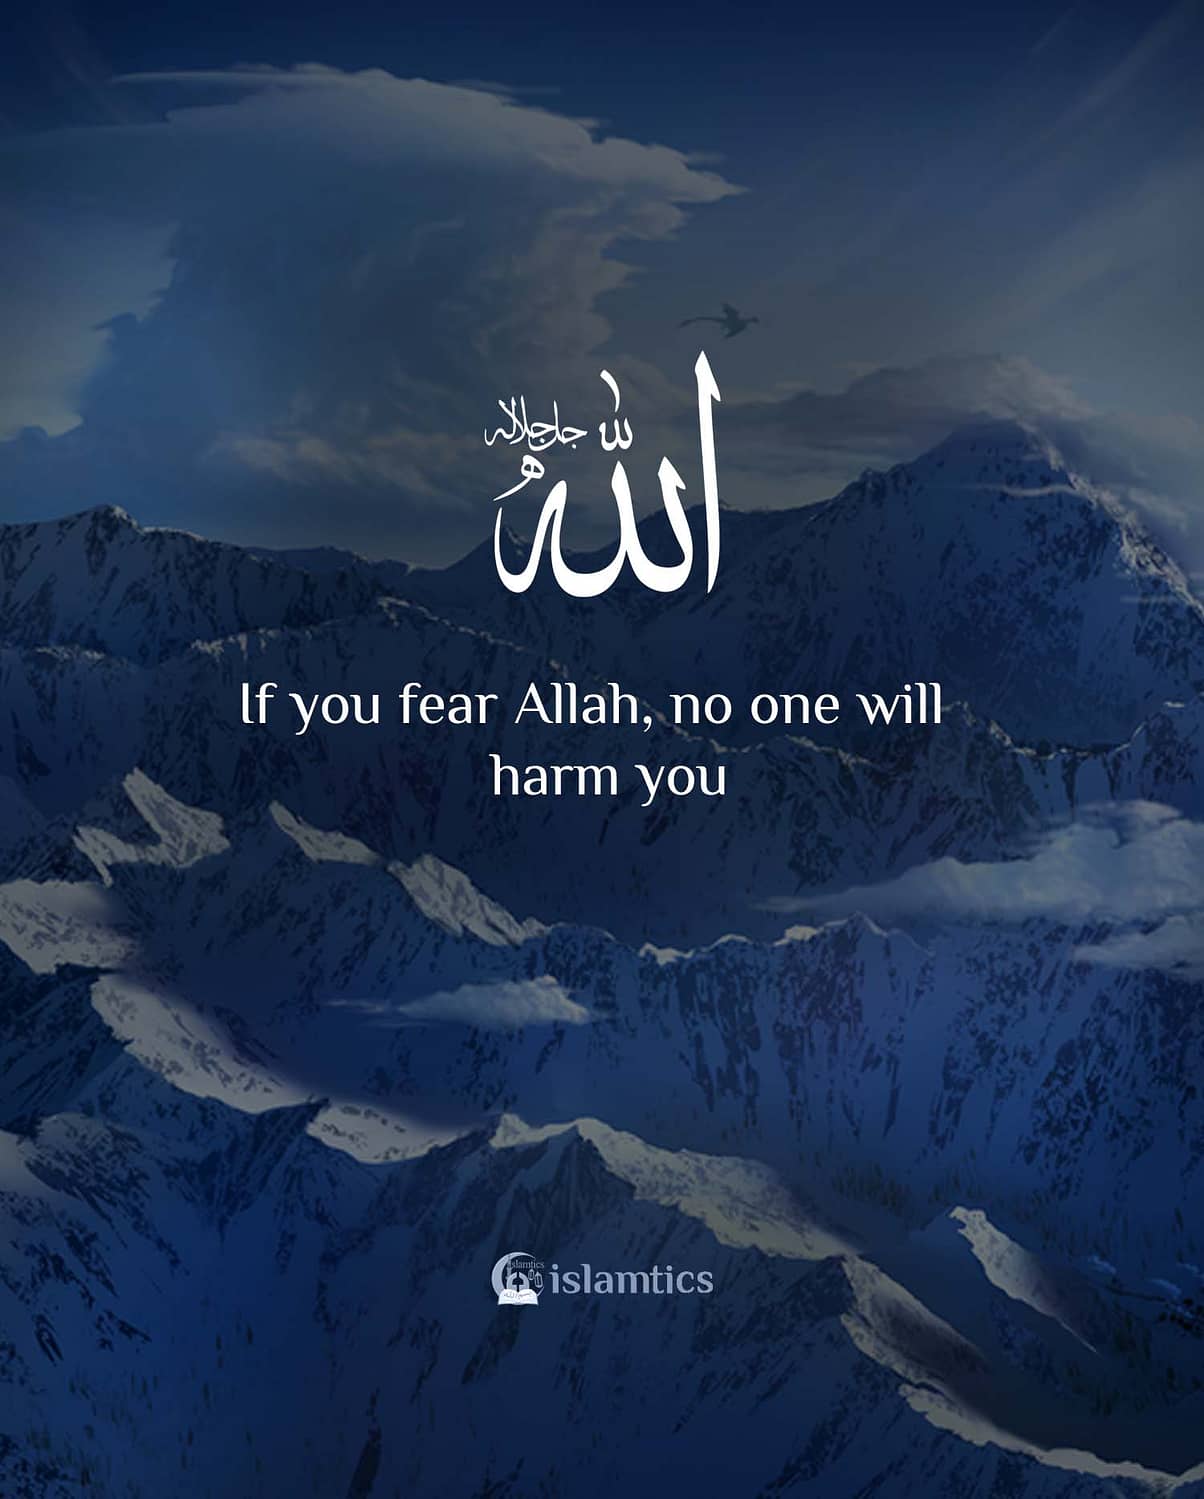 If you fear Allah, no one will harm you